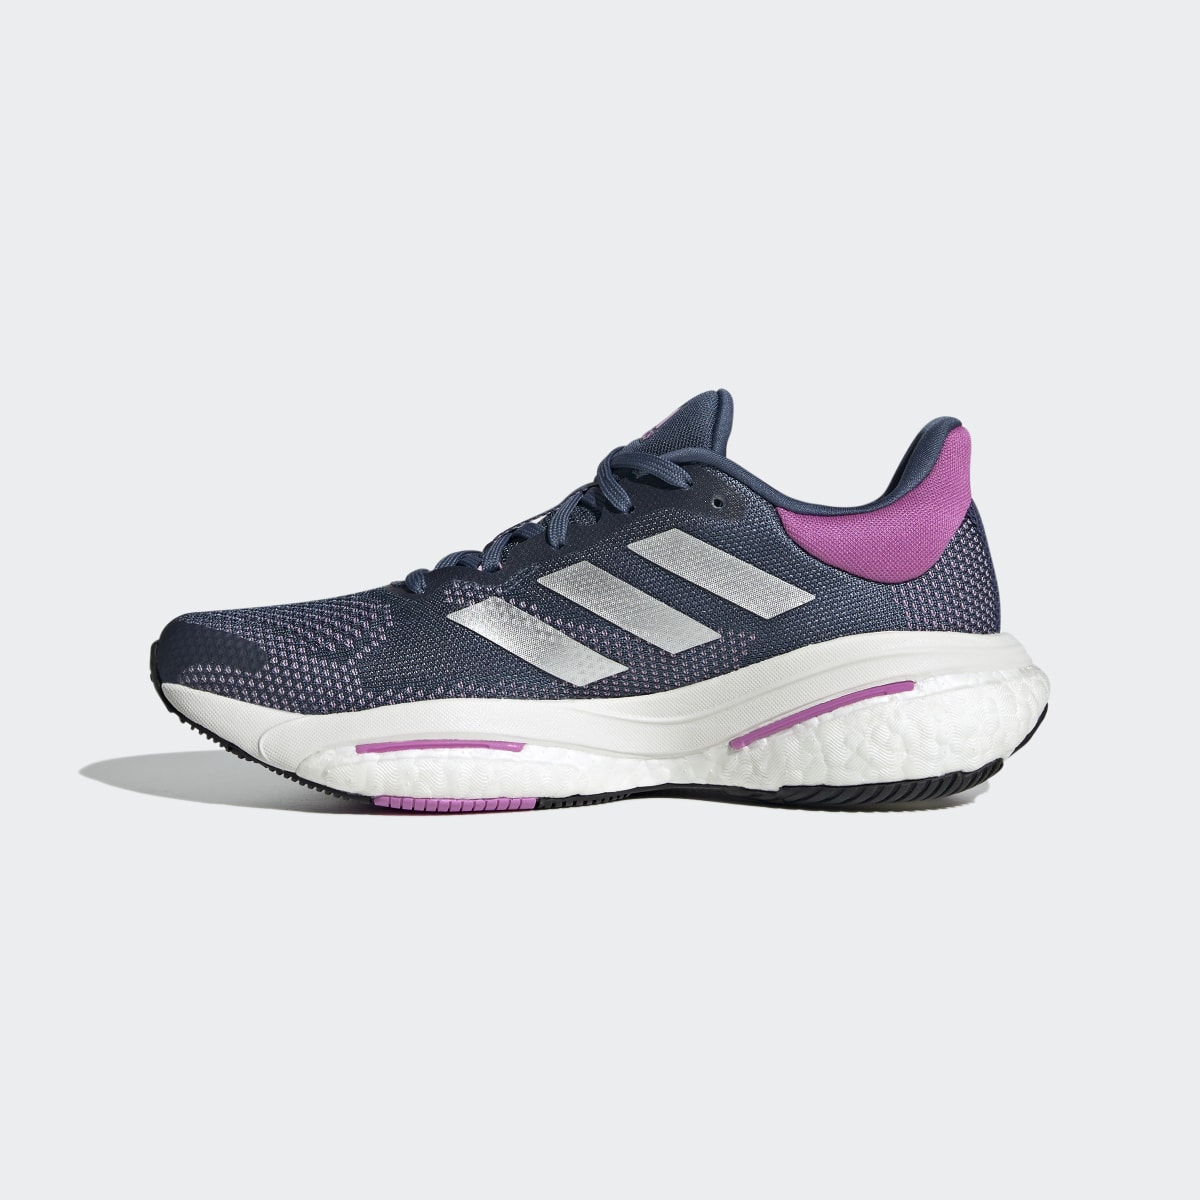 Adidas Solarglide 5 Shoes. 7